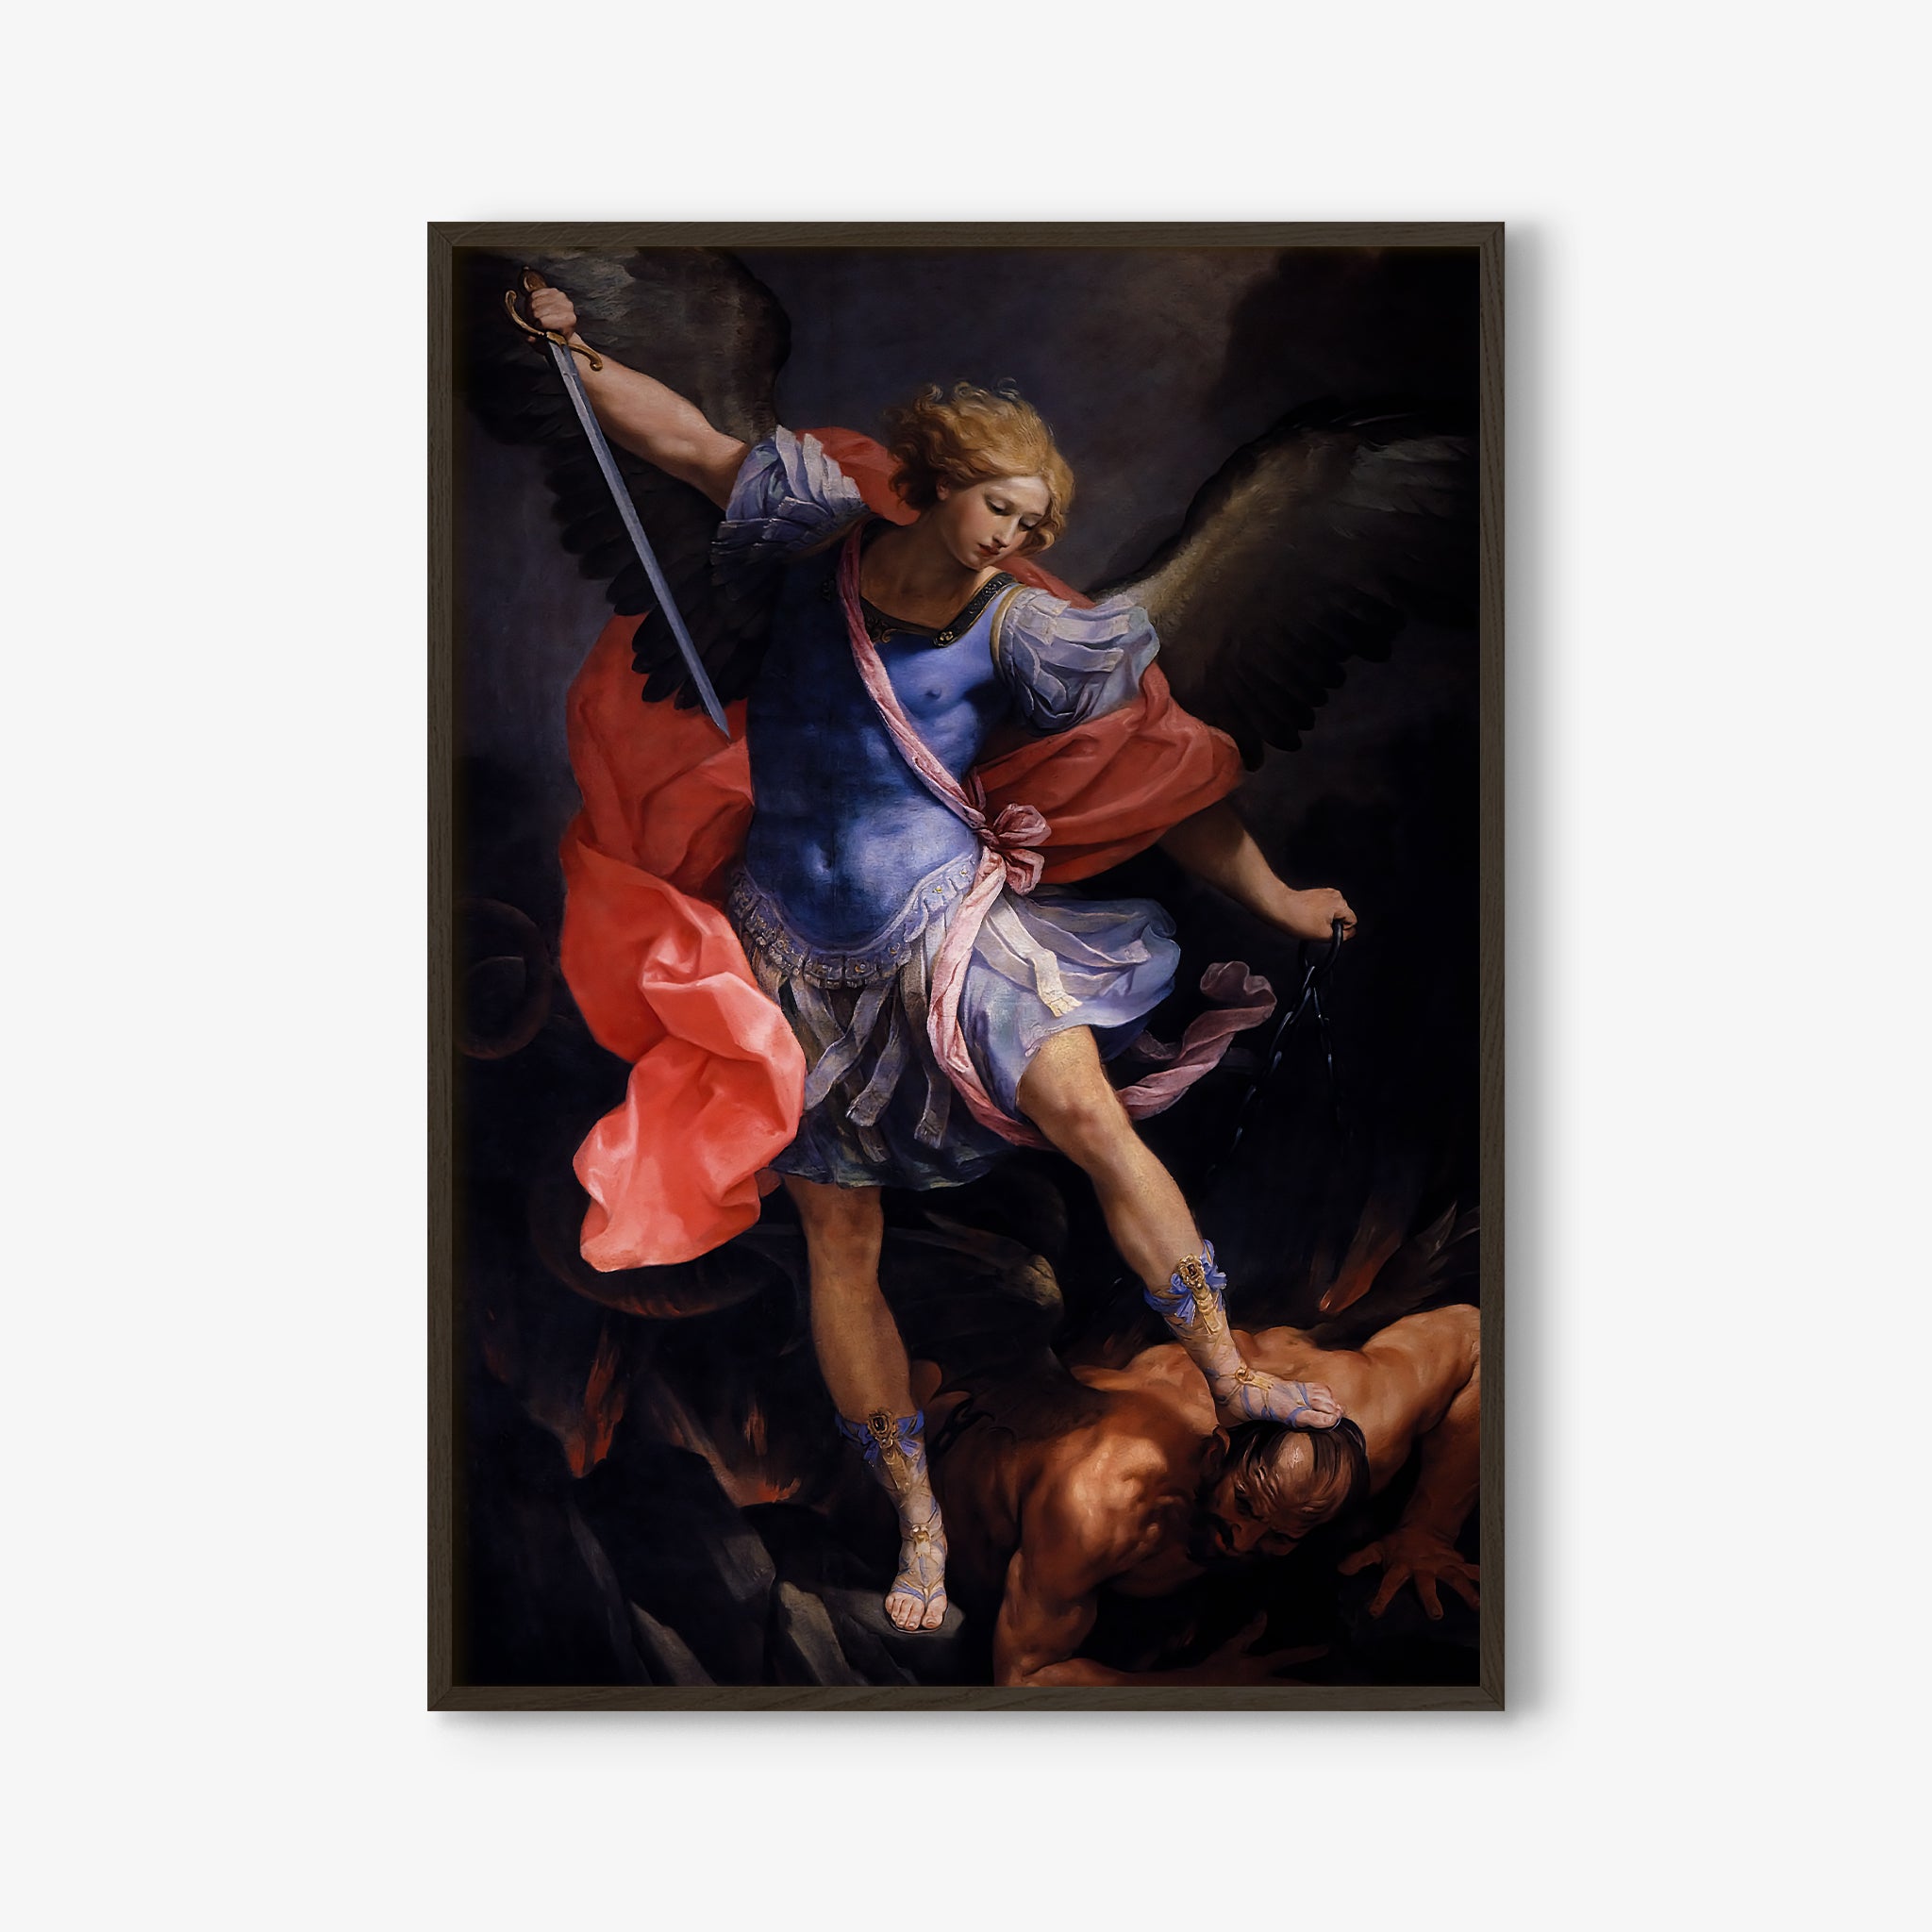 Be inspired by our classic art print Archangel Michael Defeats Satan by Guido Reni. This artwork was printed using the giclée process on archival acid-free paper and is presented in a modern black frame that captures its timeless beauty in every detail.